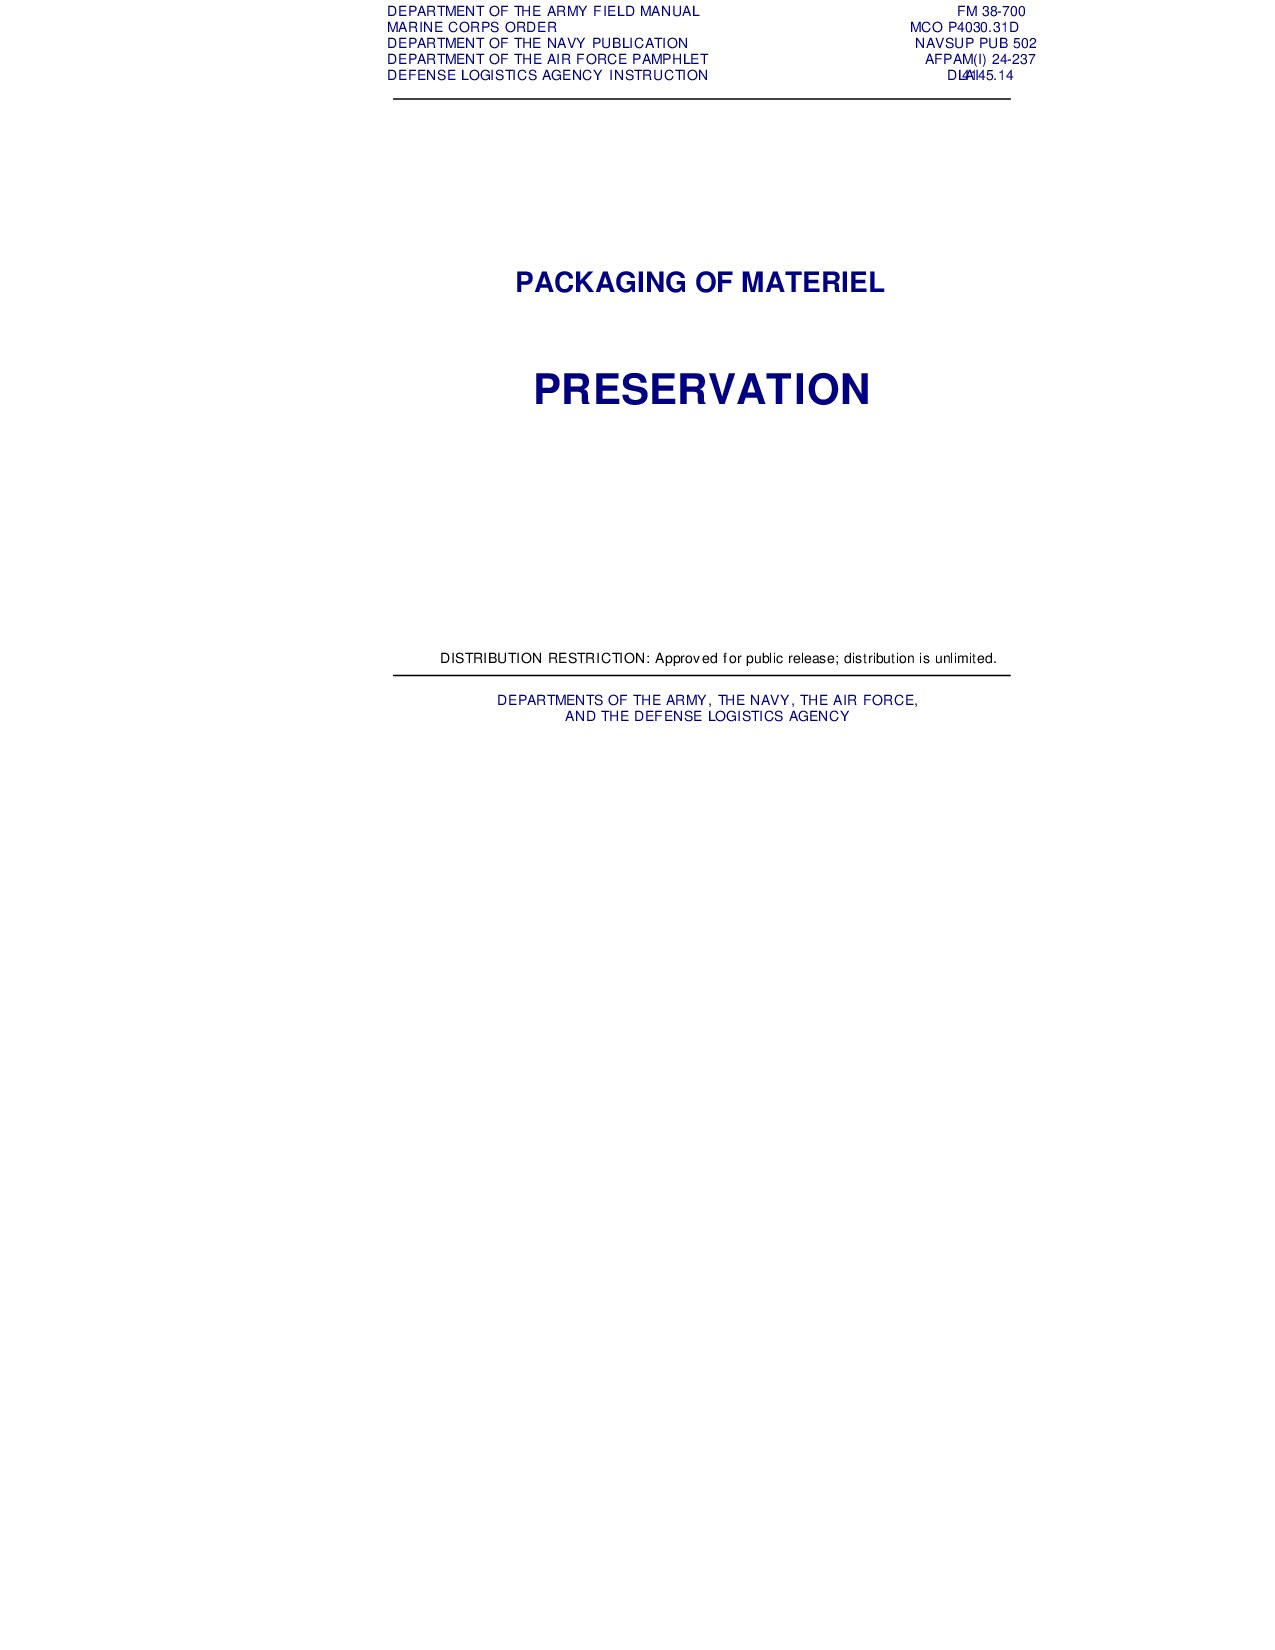 Packaging of Material - Preservation